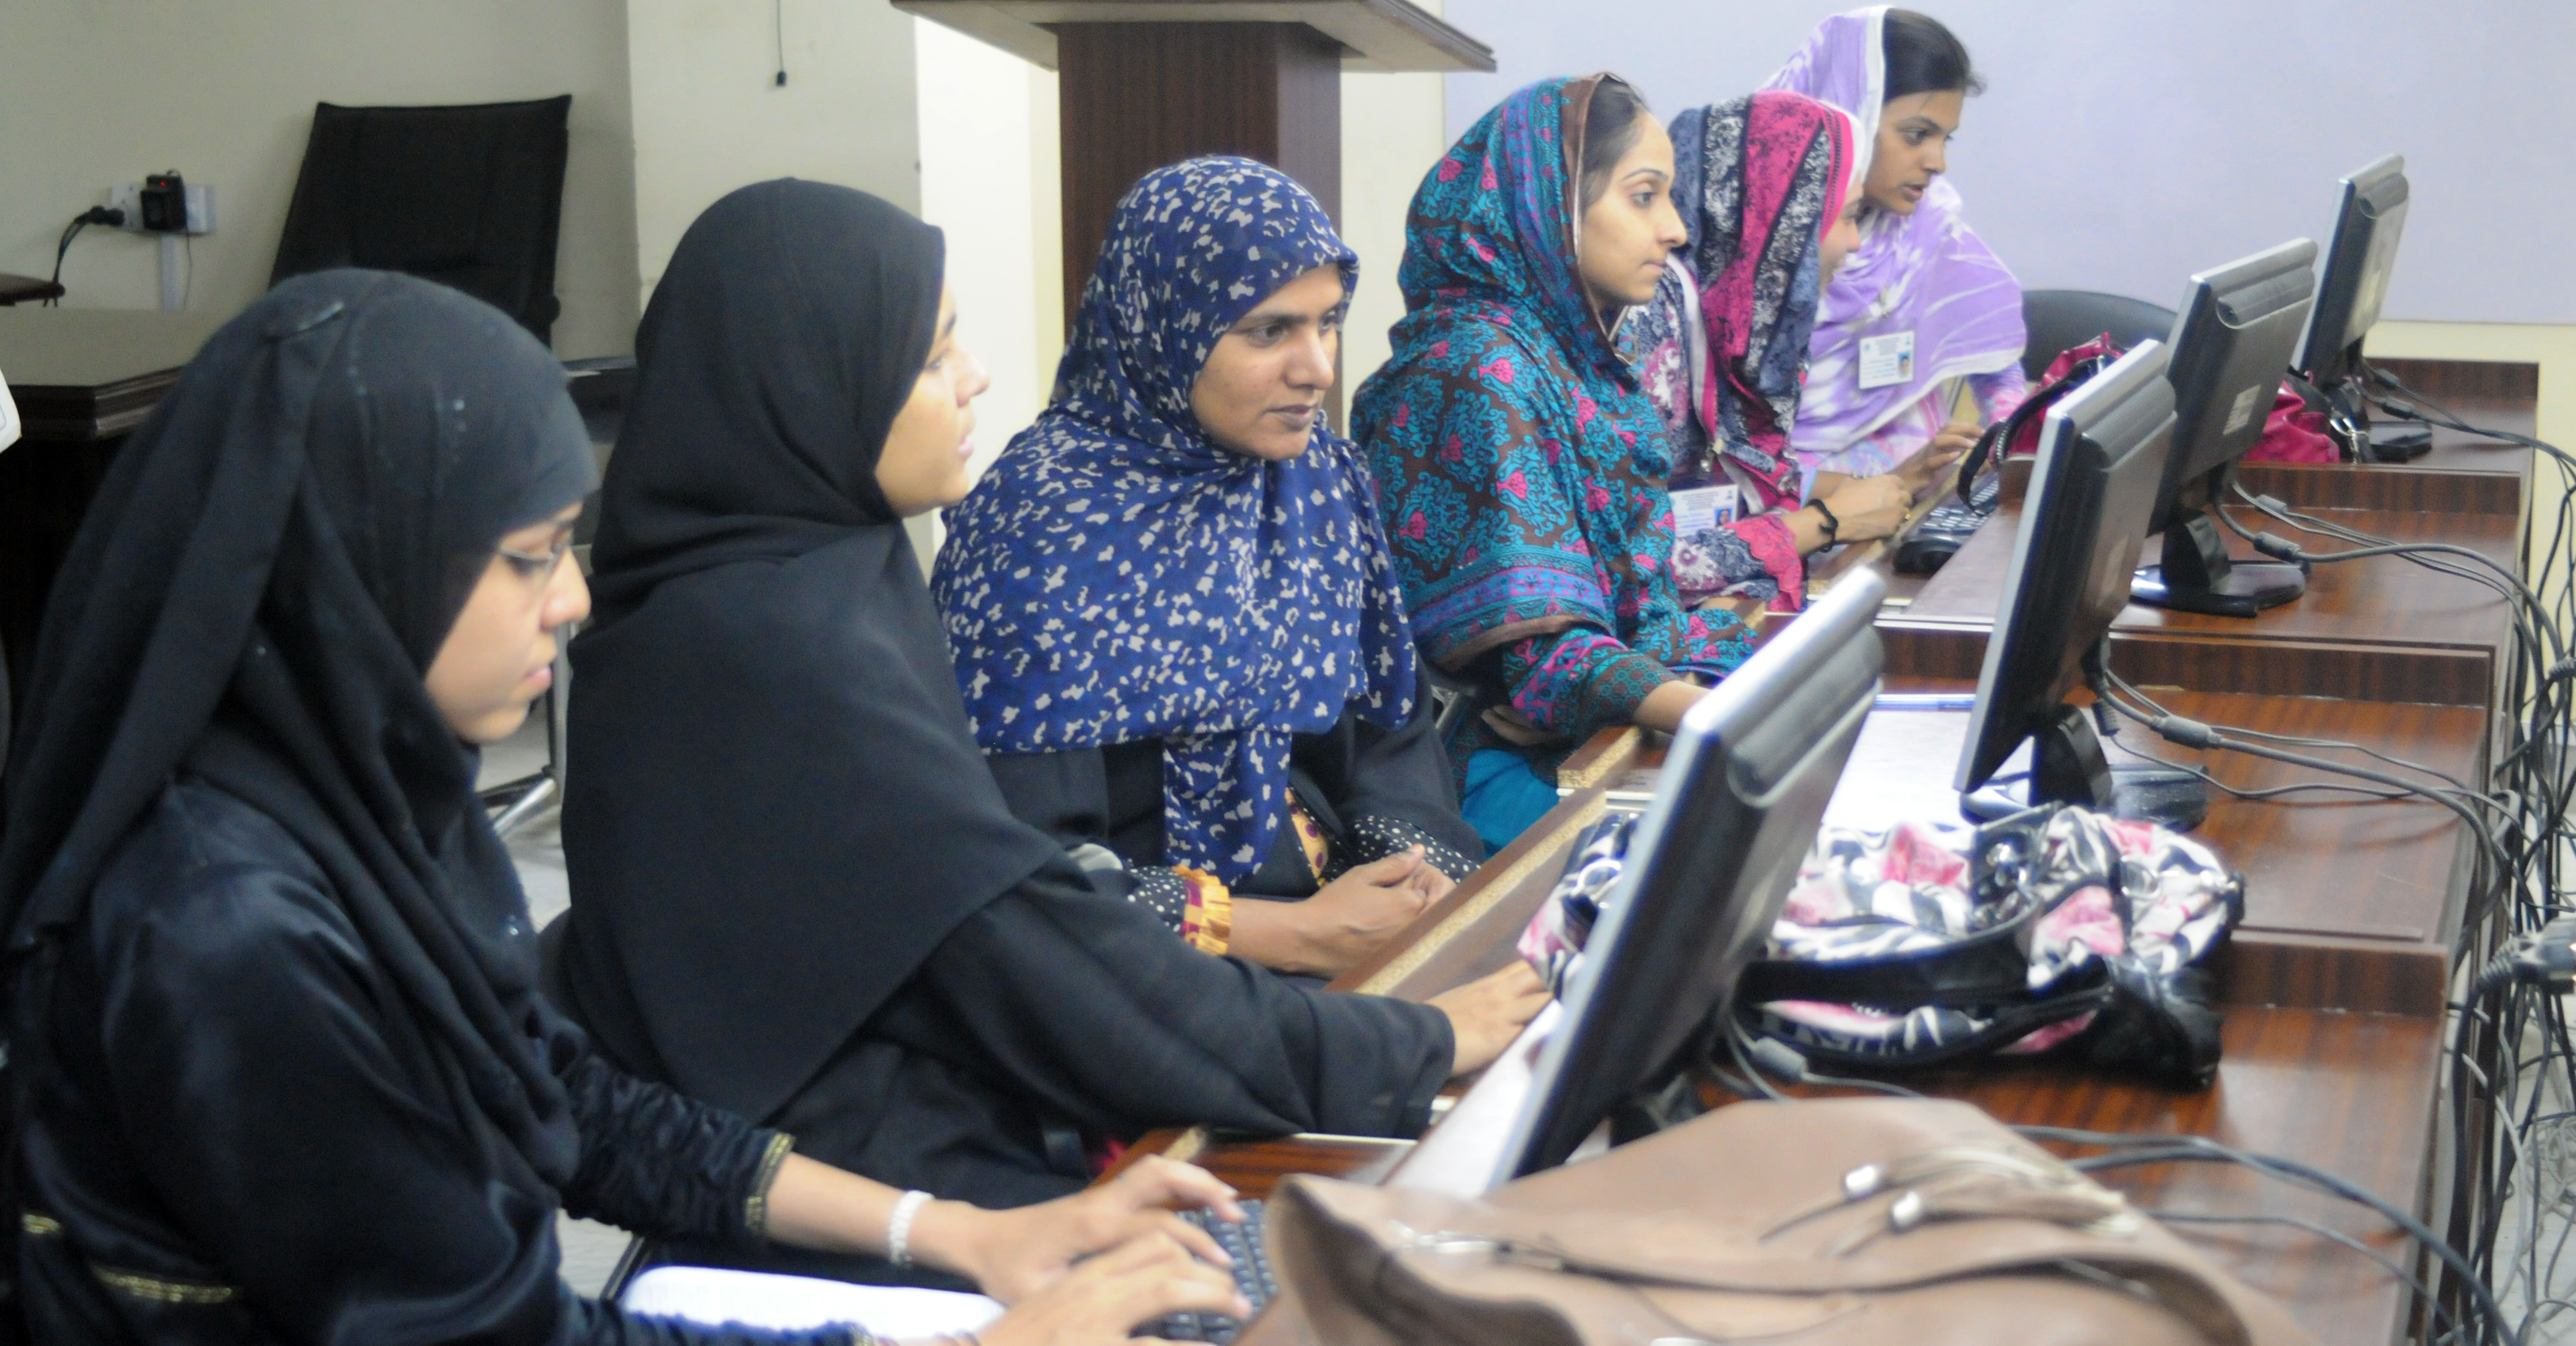 How Can South Asia’s Youth Plug into Digital Jobs of the Future